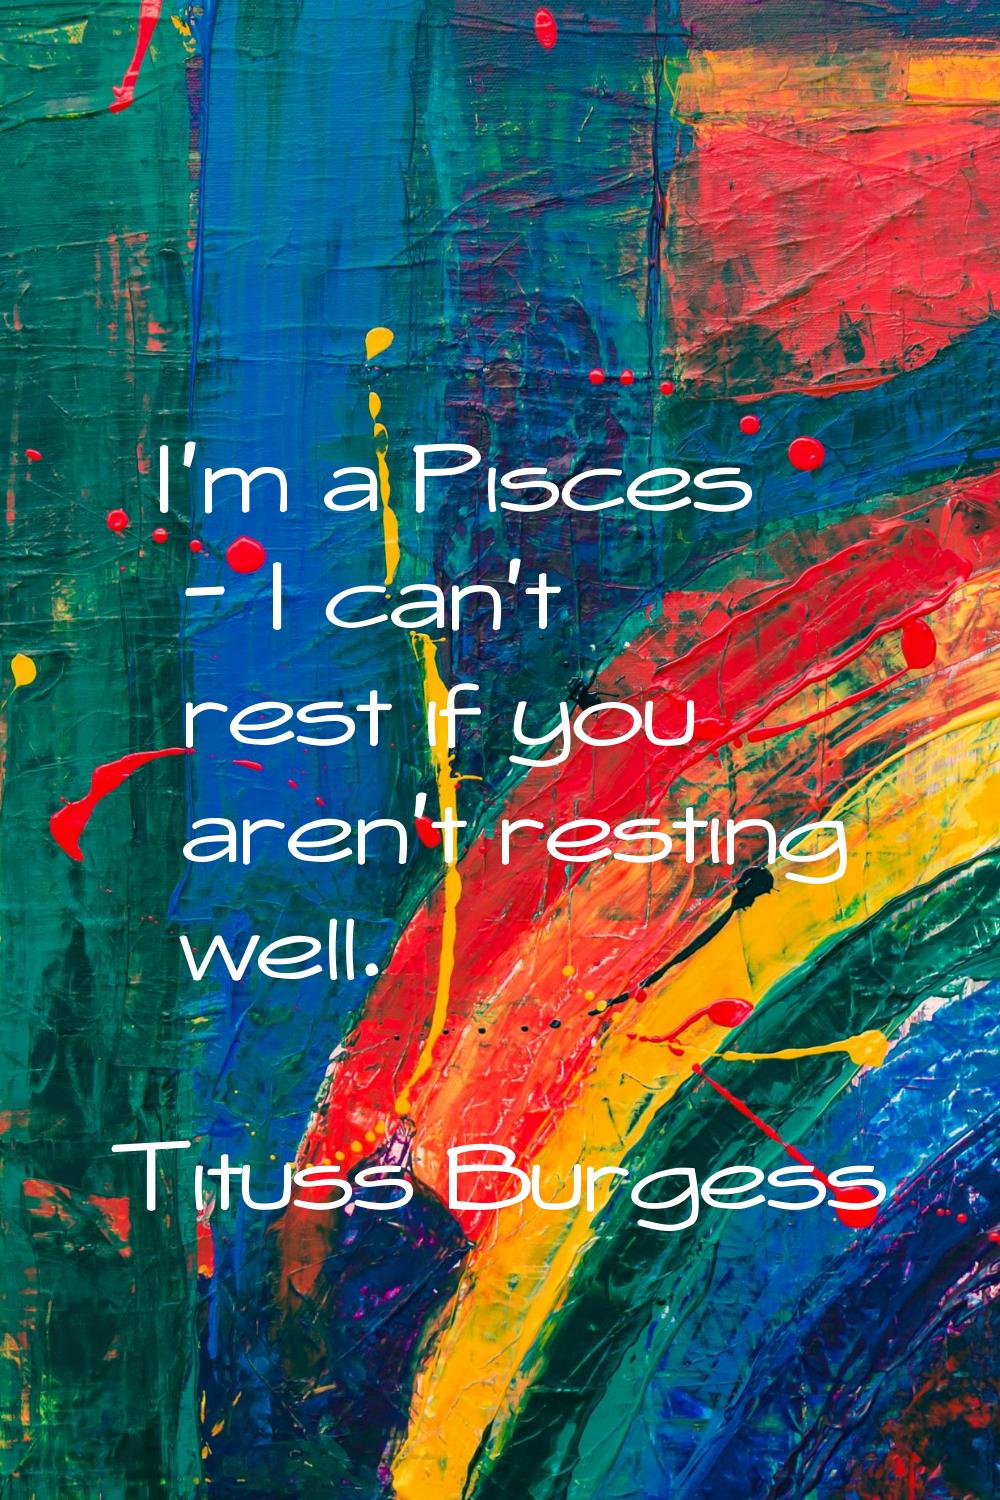 I'm a Pisces - I can't rest if you aren't resting well.